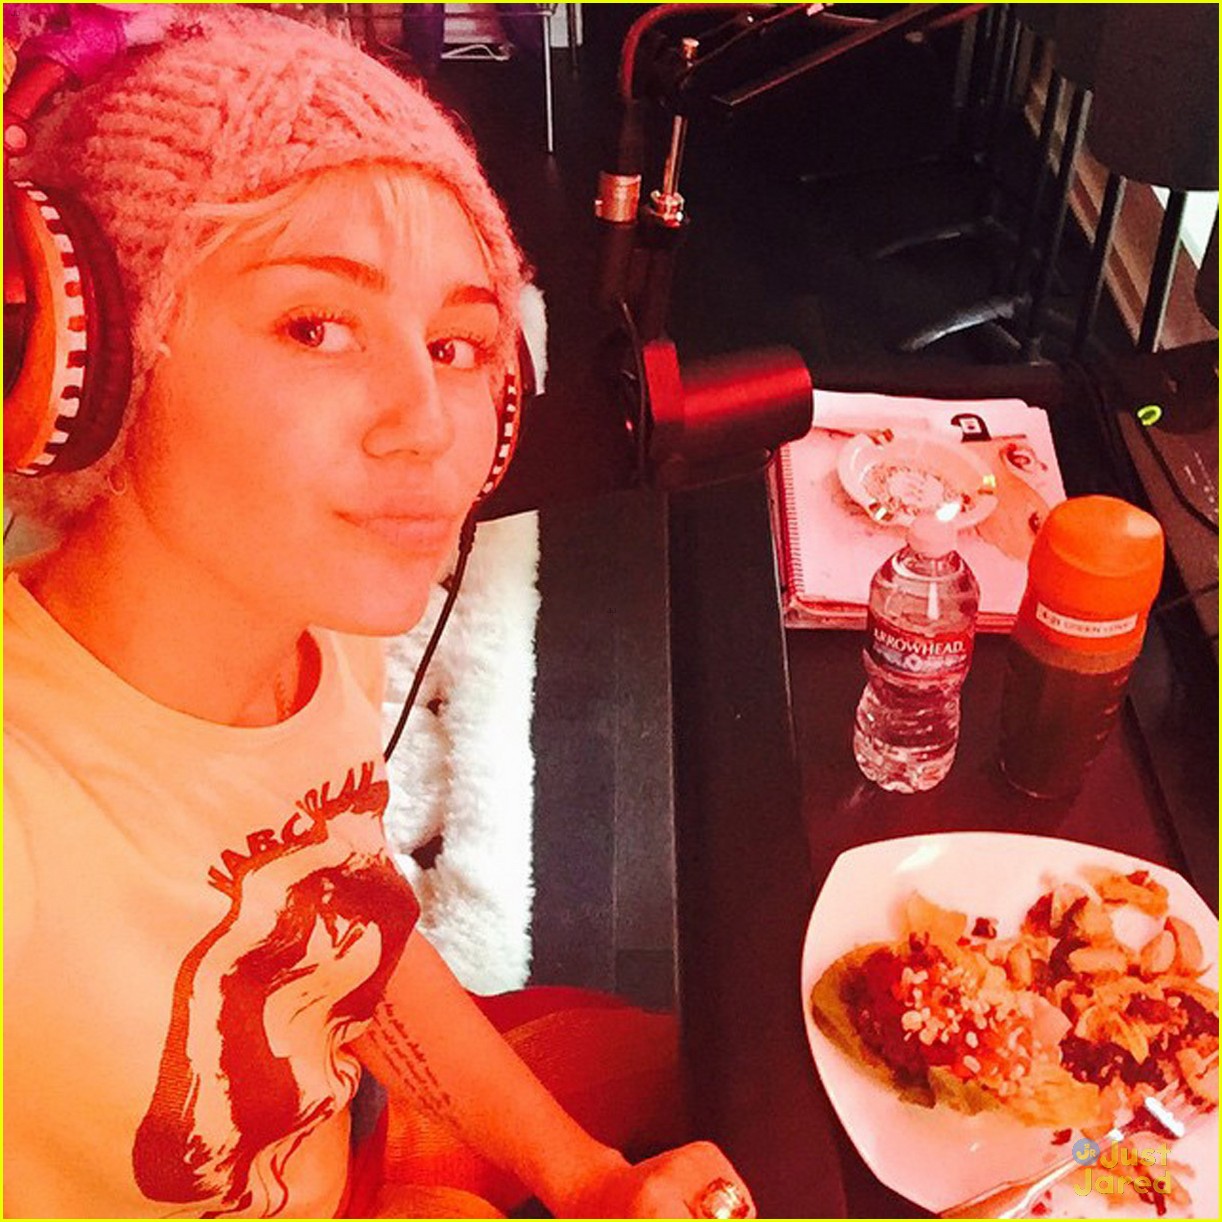 miley cyrus records music after split 04